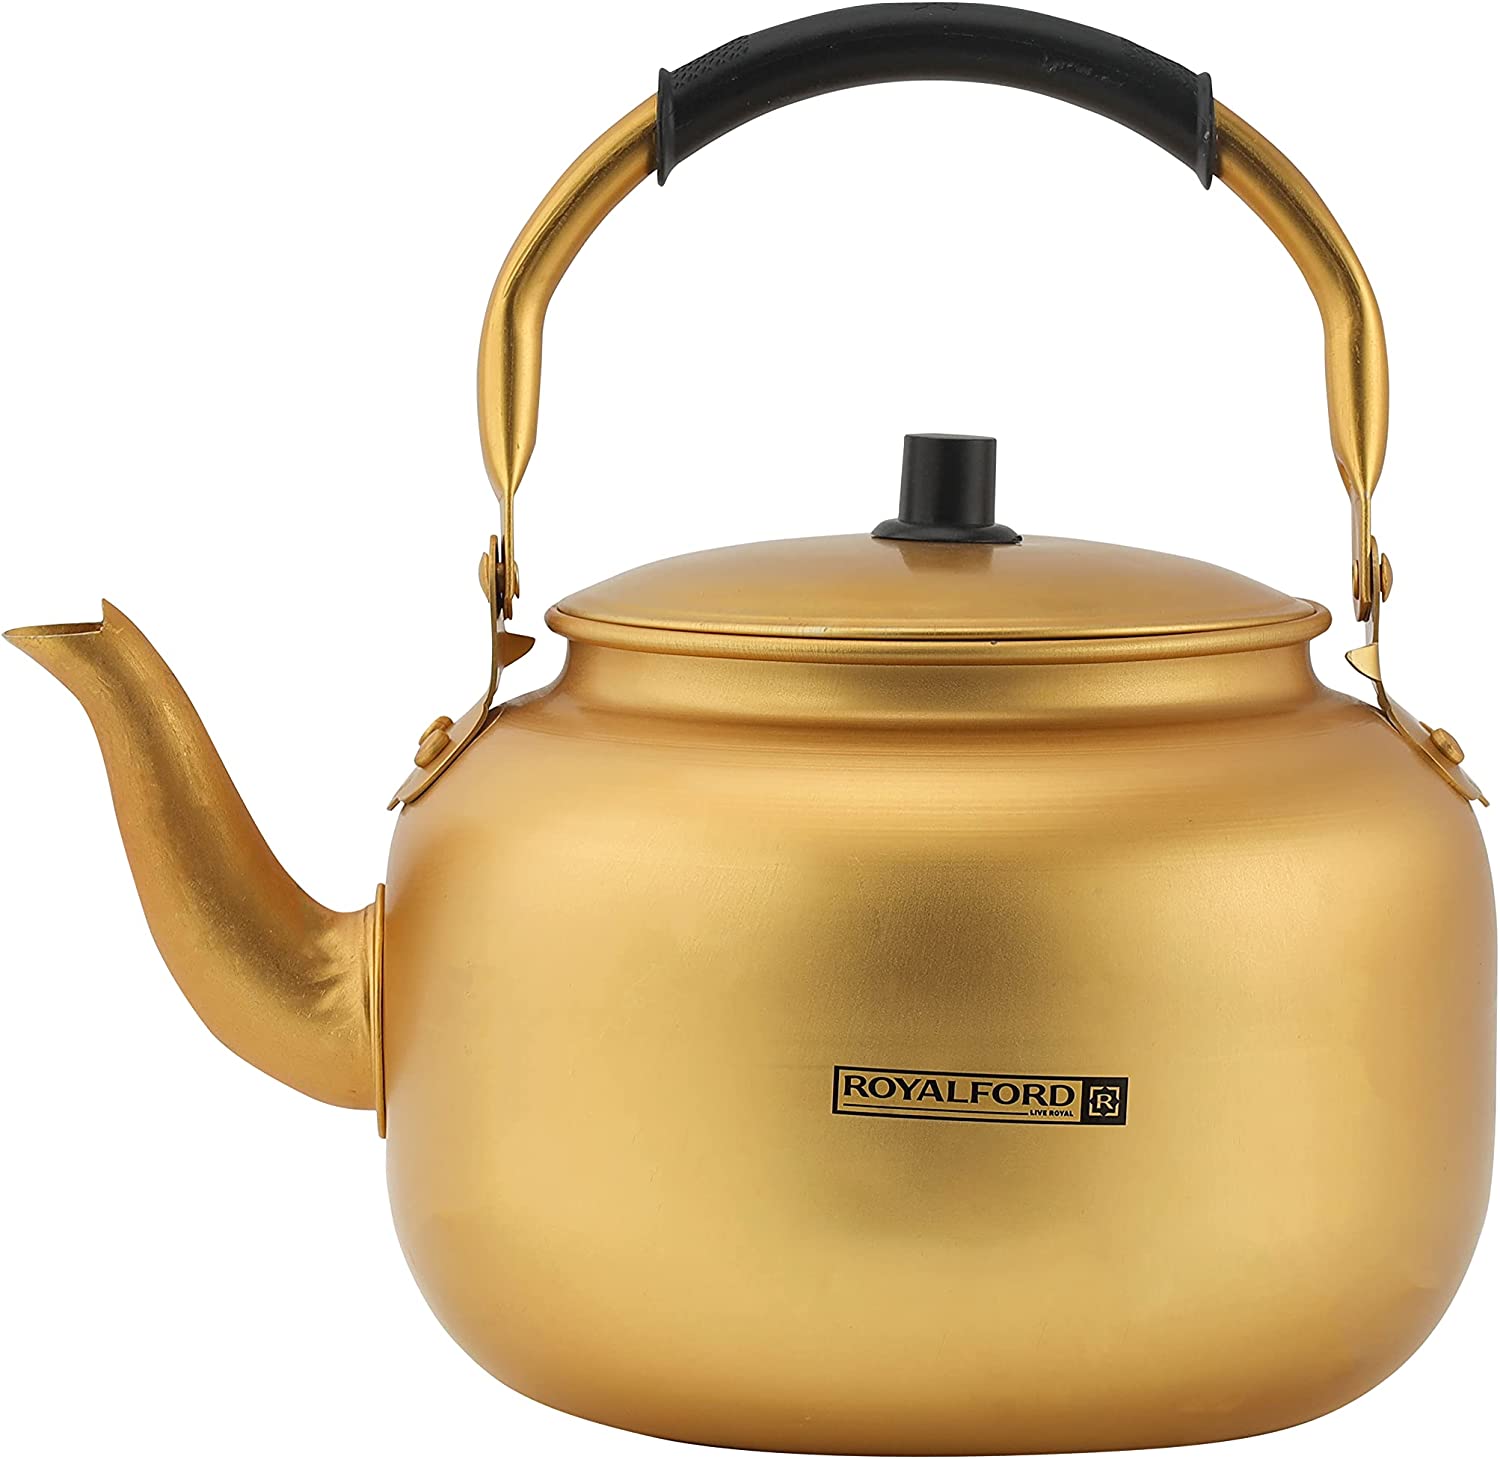 Royalford 6.0L Golden-Finish Aluminum Tea Kettle- RF10770, Rust And Corrosion Resistant Body With Comfortable And Anti-Scald Handle, Induction Compatible, Perfect For Indoor And Outdoor Use, Golden